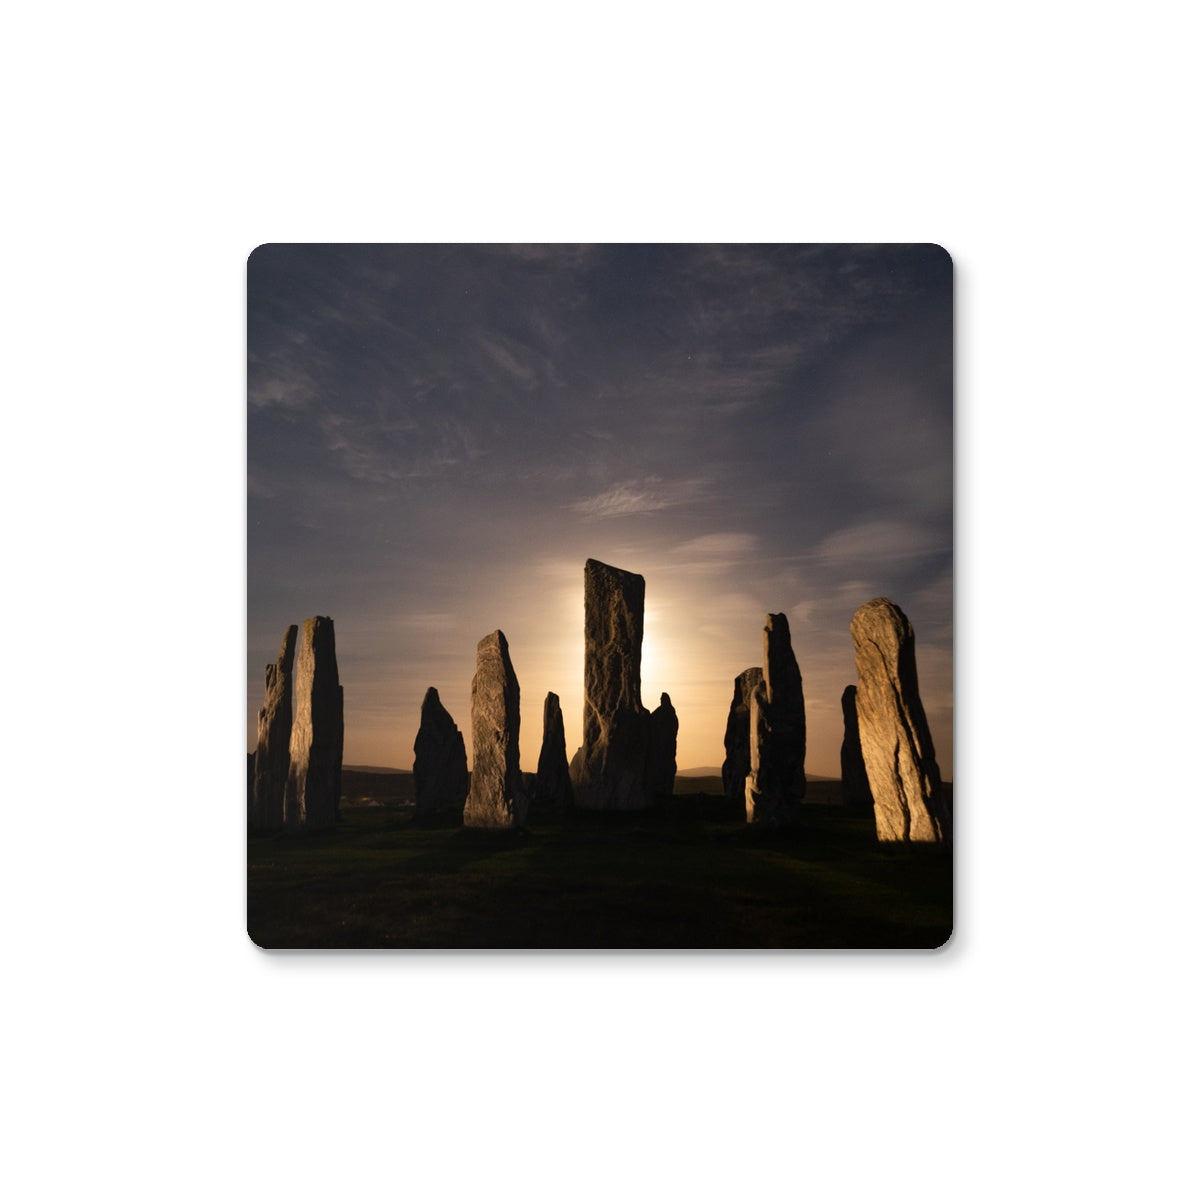 Callanish, Full Moon and Clouds Coaster